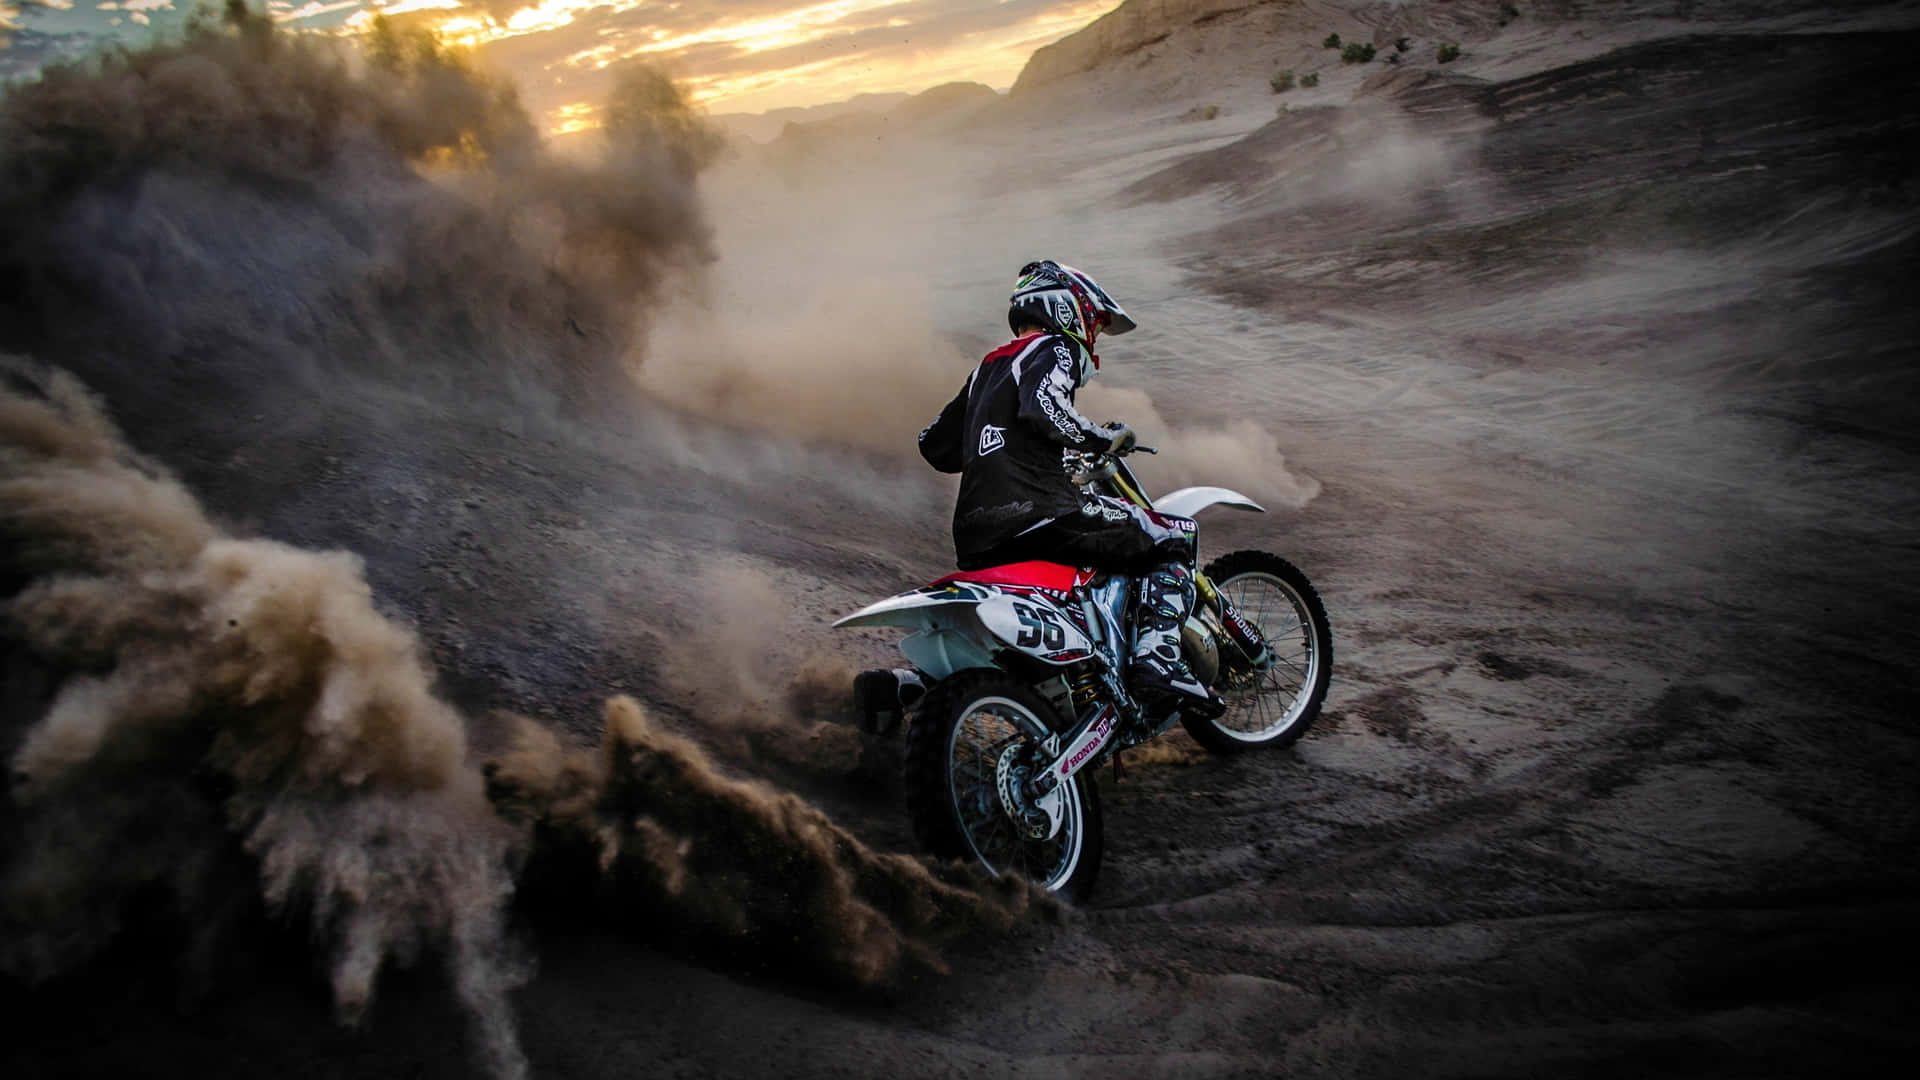 Motocross racer takes on a thrilling jump